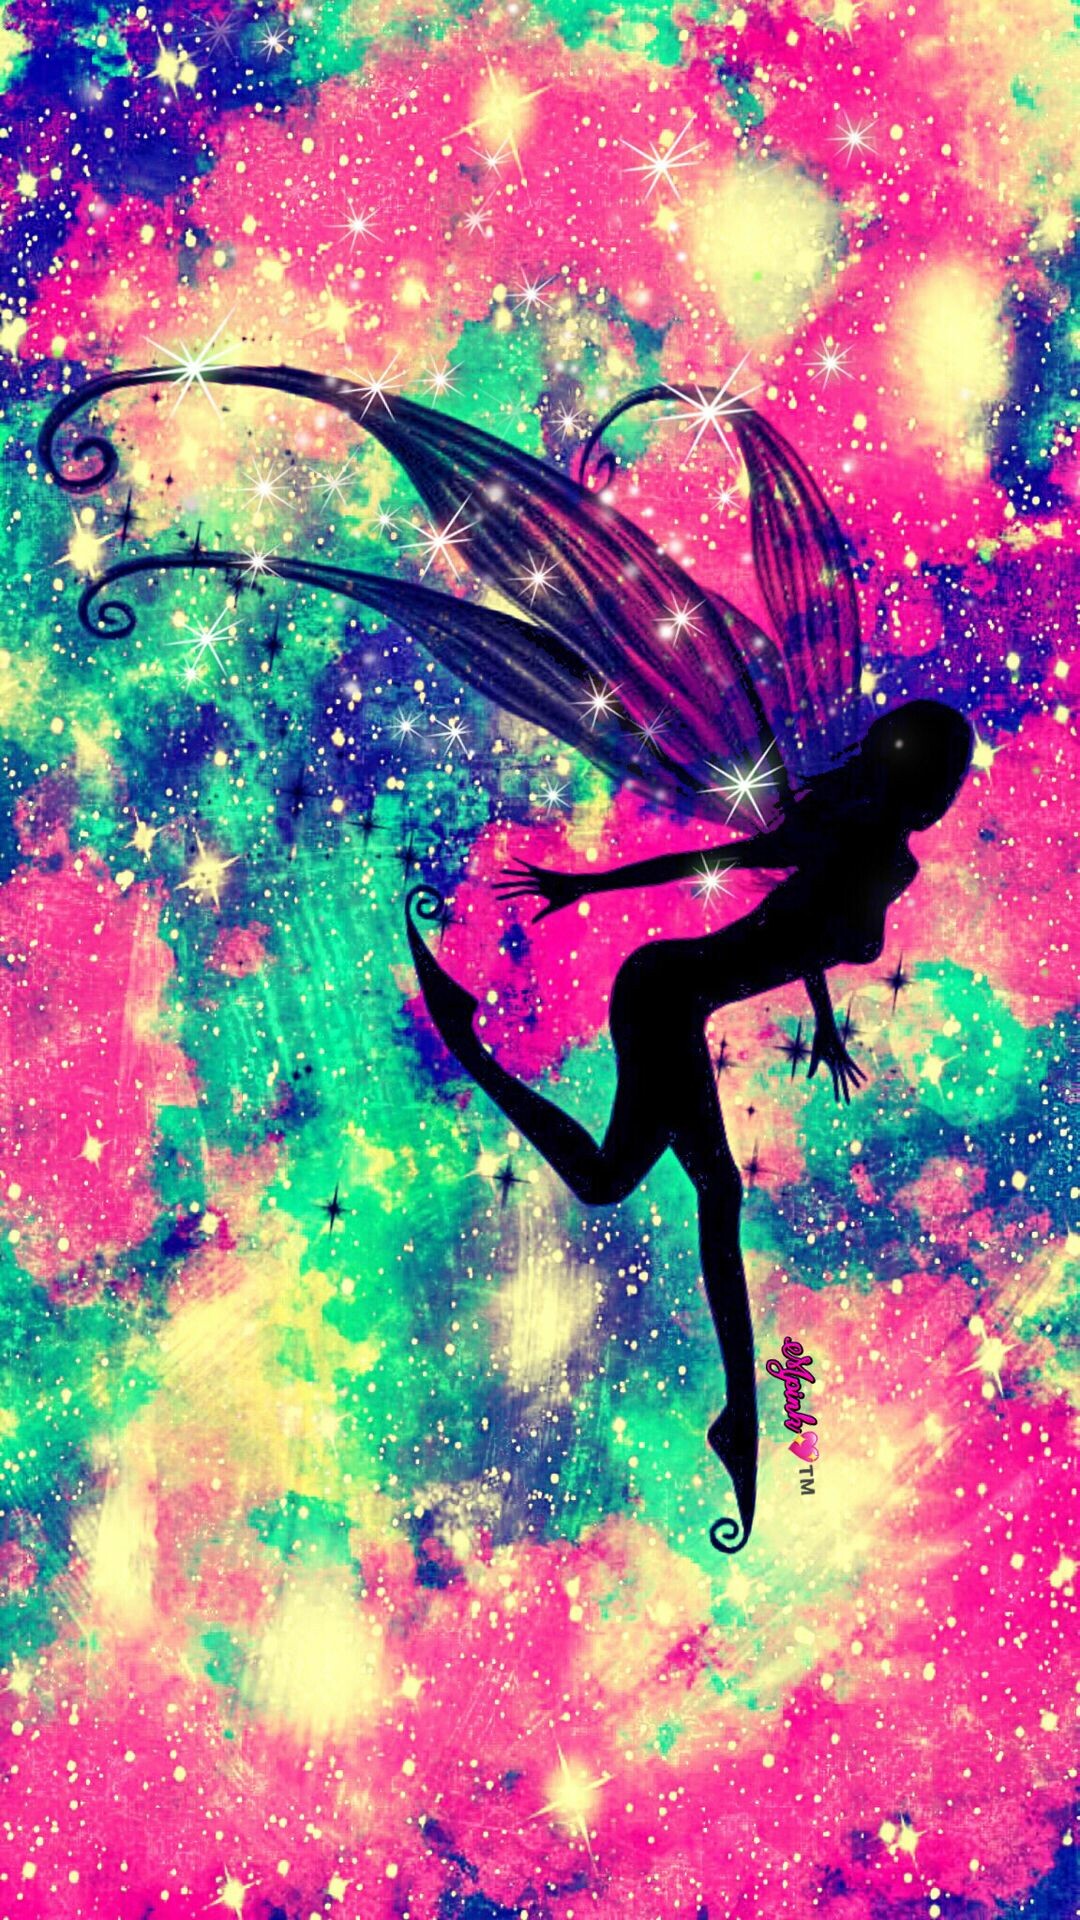 Fairy: Magical creatures, looking like tiny humans with wings. 1080x1920 Full HD Wallpaper.